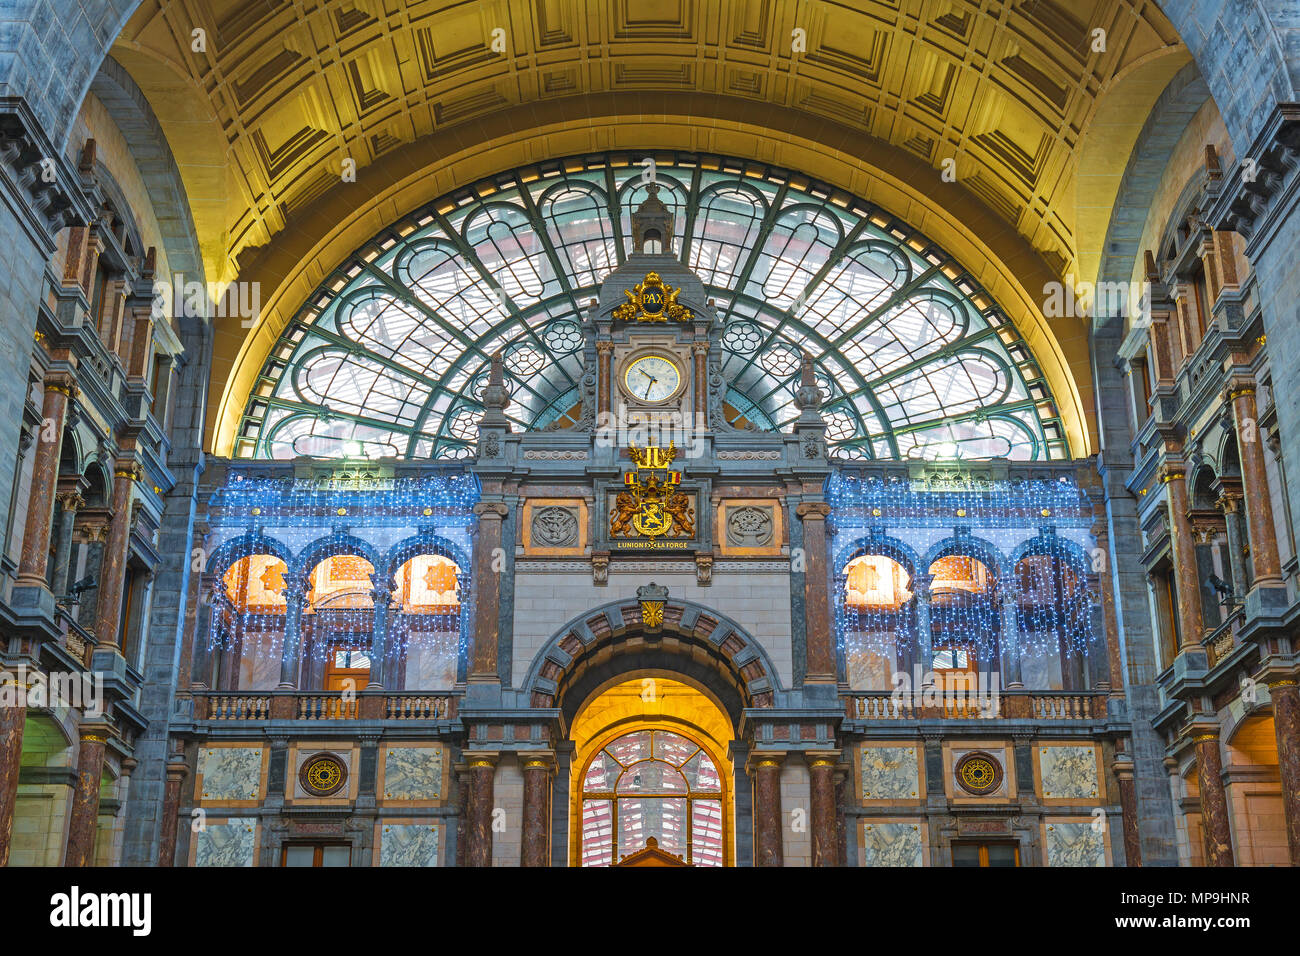 Facade of the Antwerp Central Station with gold decorations and neo-classical style, Antwerp, Belgium. Stock Photo